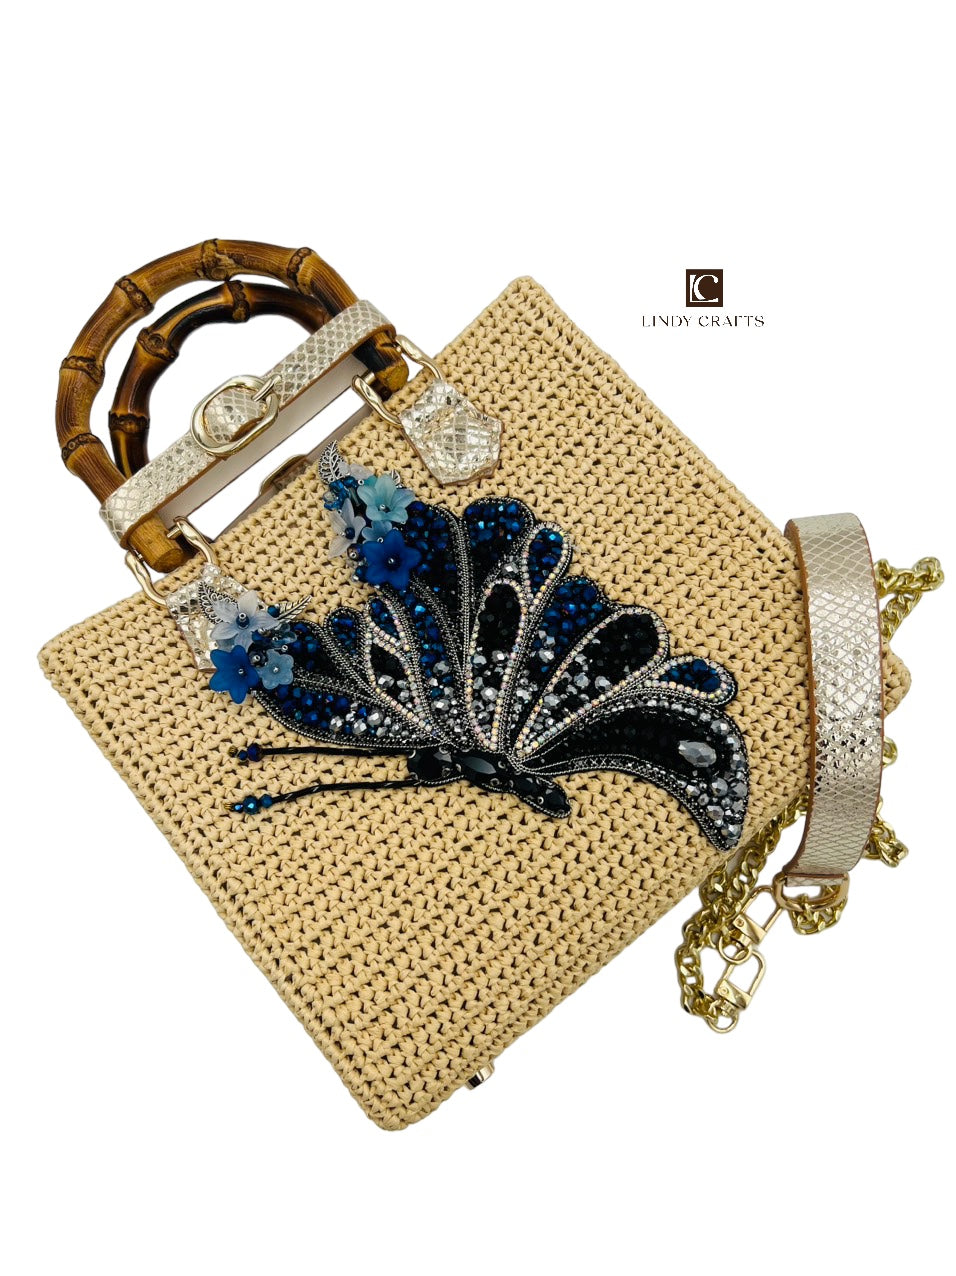 Spring Butterfly Ballet Bamboo Bag in Nude - Dark Blue - Made to order